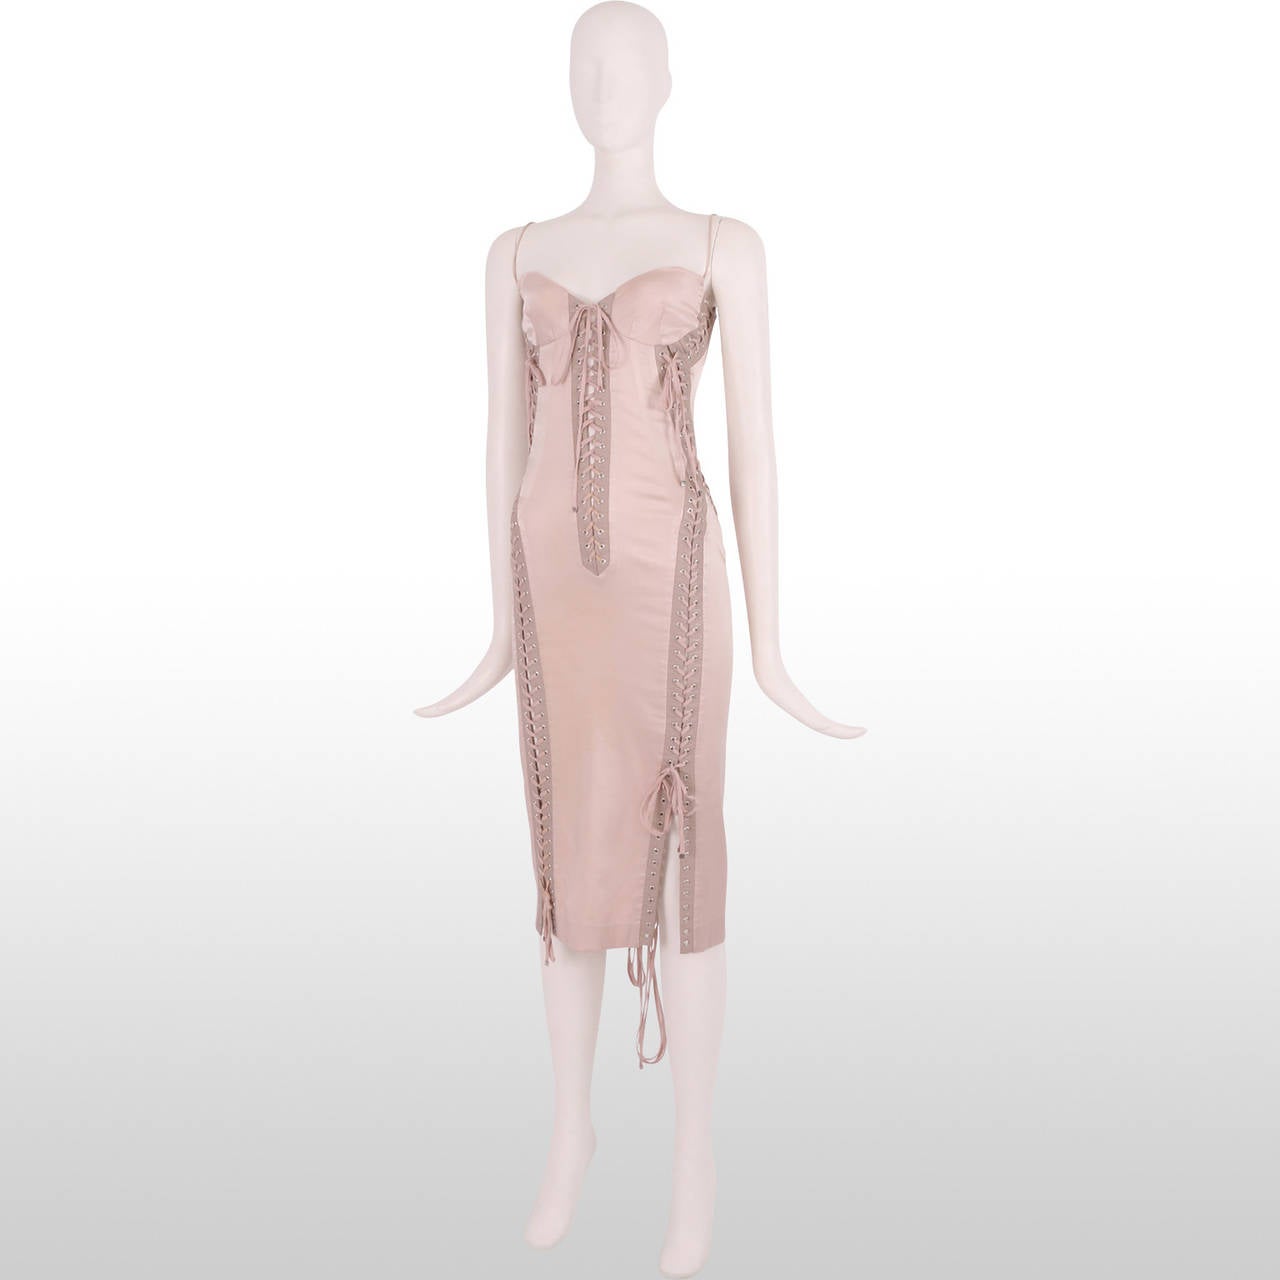 Women's Dolce and Gabbana S/S 2003 Powder Pink Lace Up Dress - size S For Sale